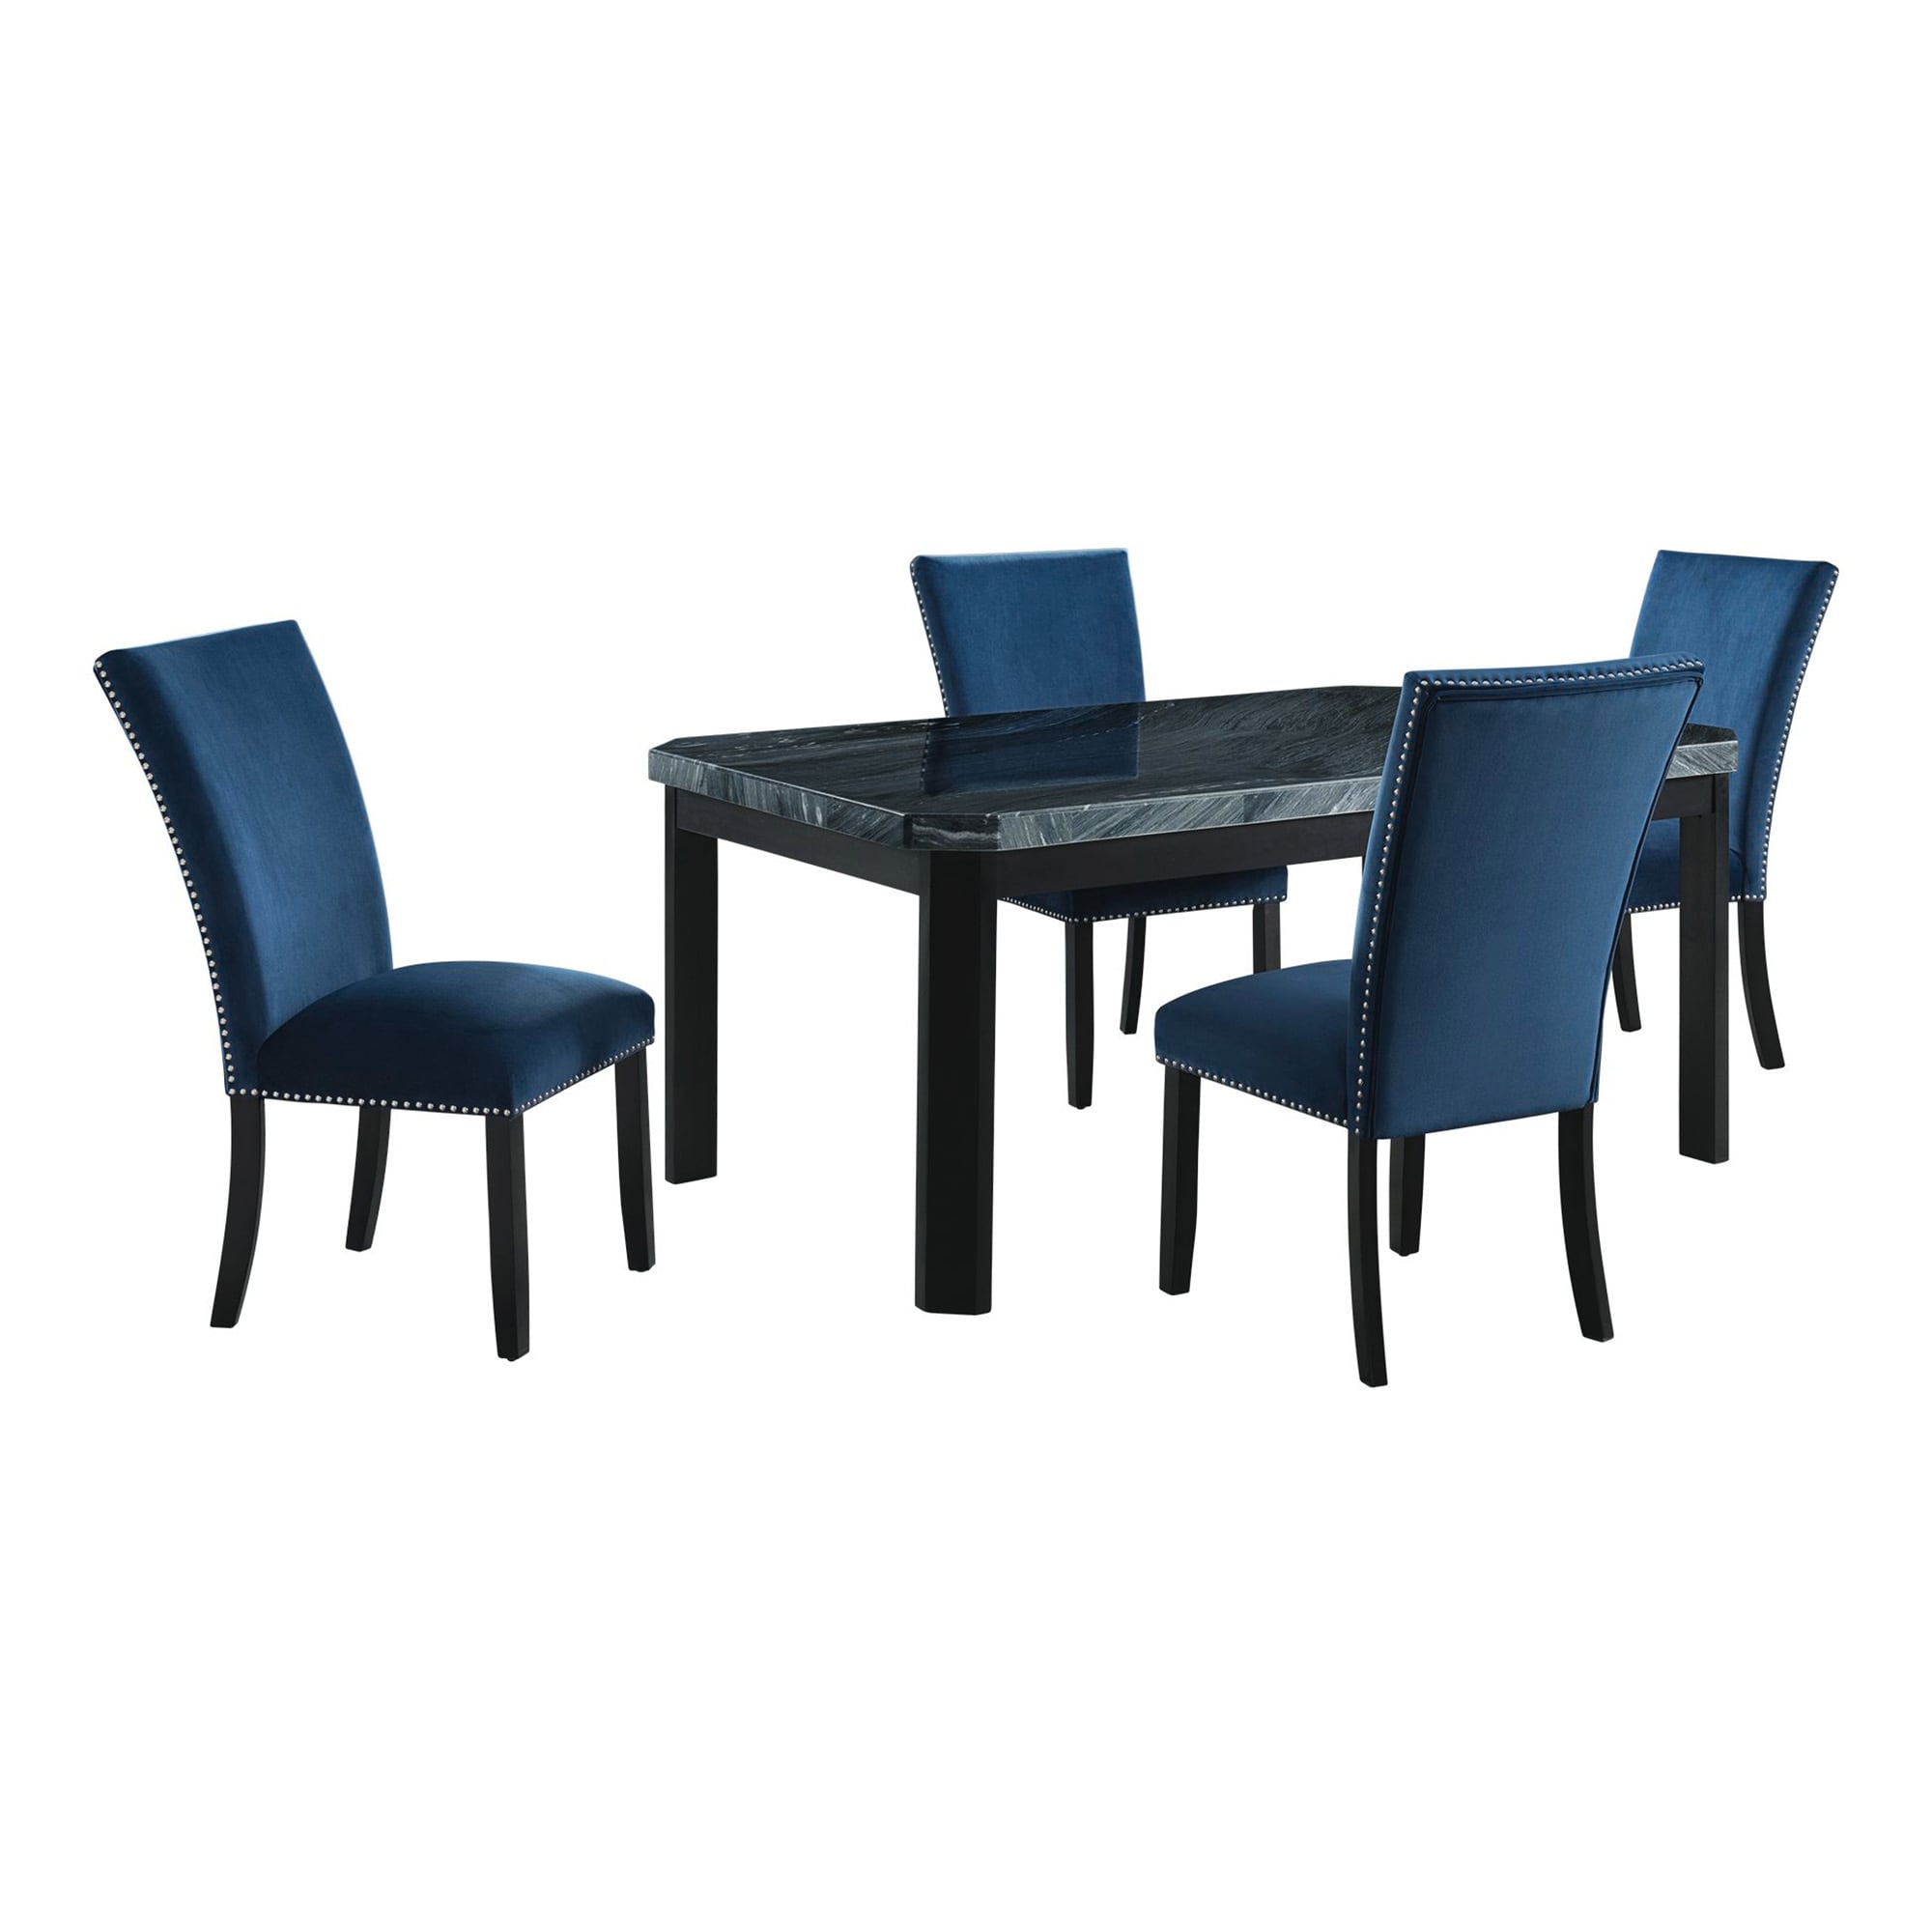 Celine Grey Transitional Dining Room Set with Rectangular Table (Seats 4) Marble in Blue | - Picket House Furnishings CFC300GBV5PC